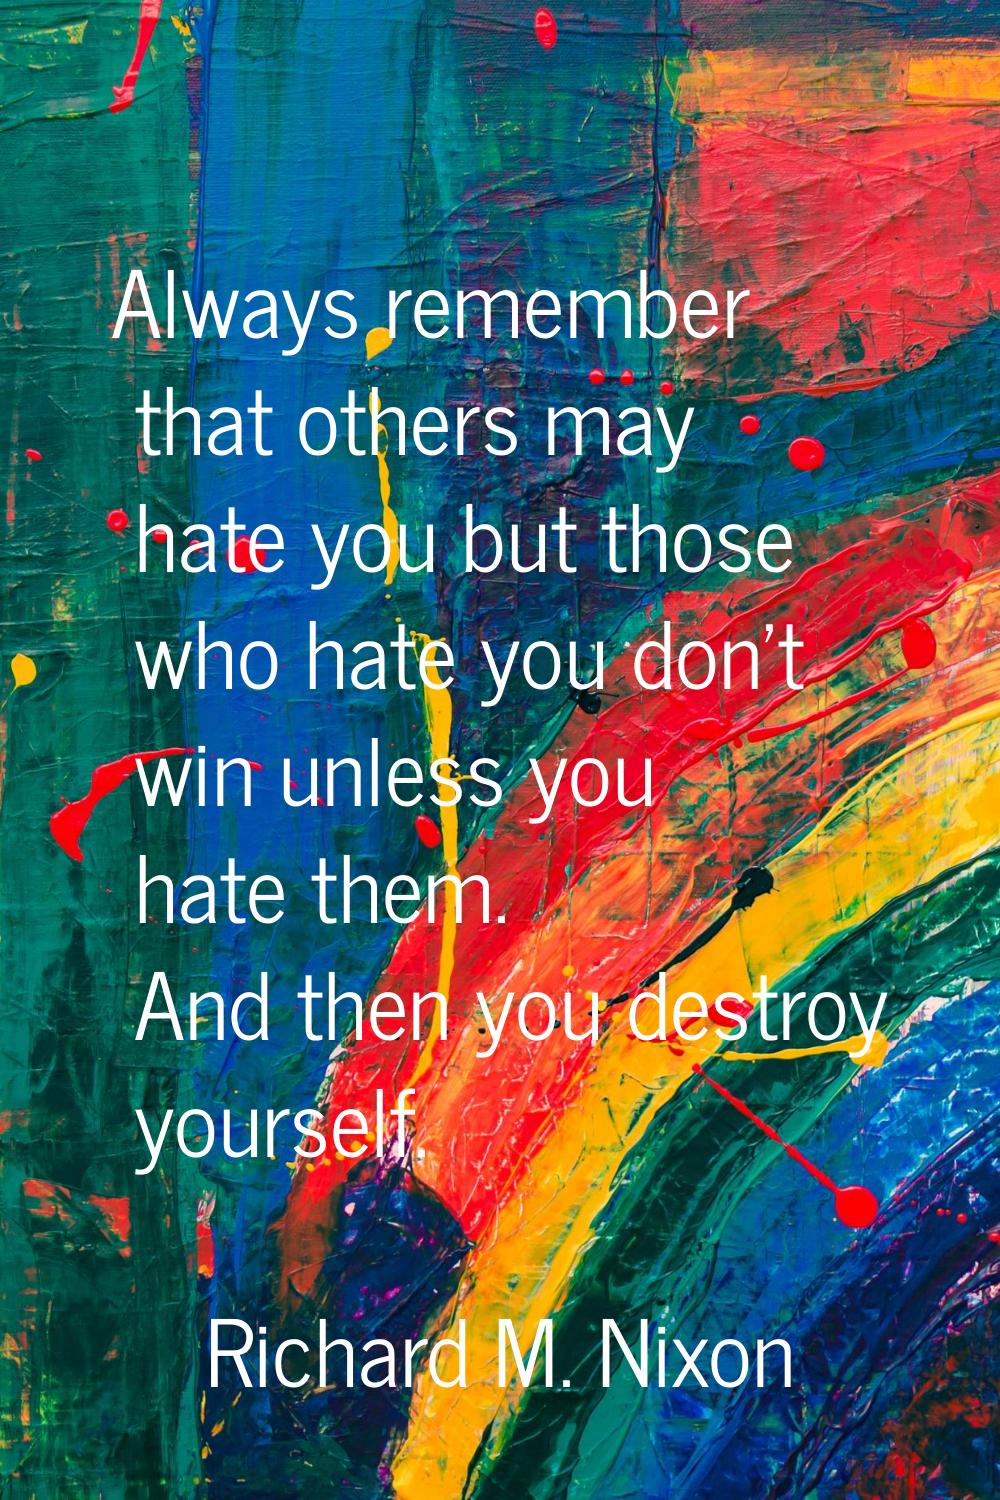 Always remember that others may hate you but those who hate you don't win unless you hate them. And